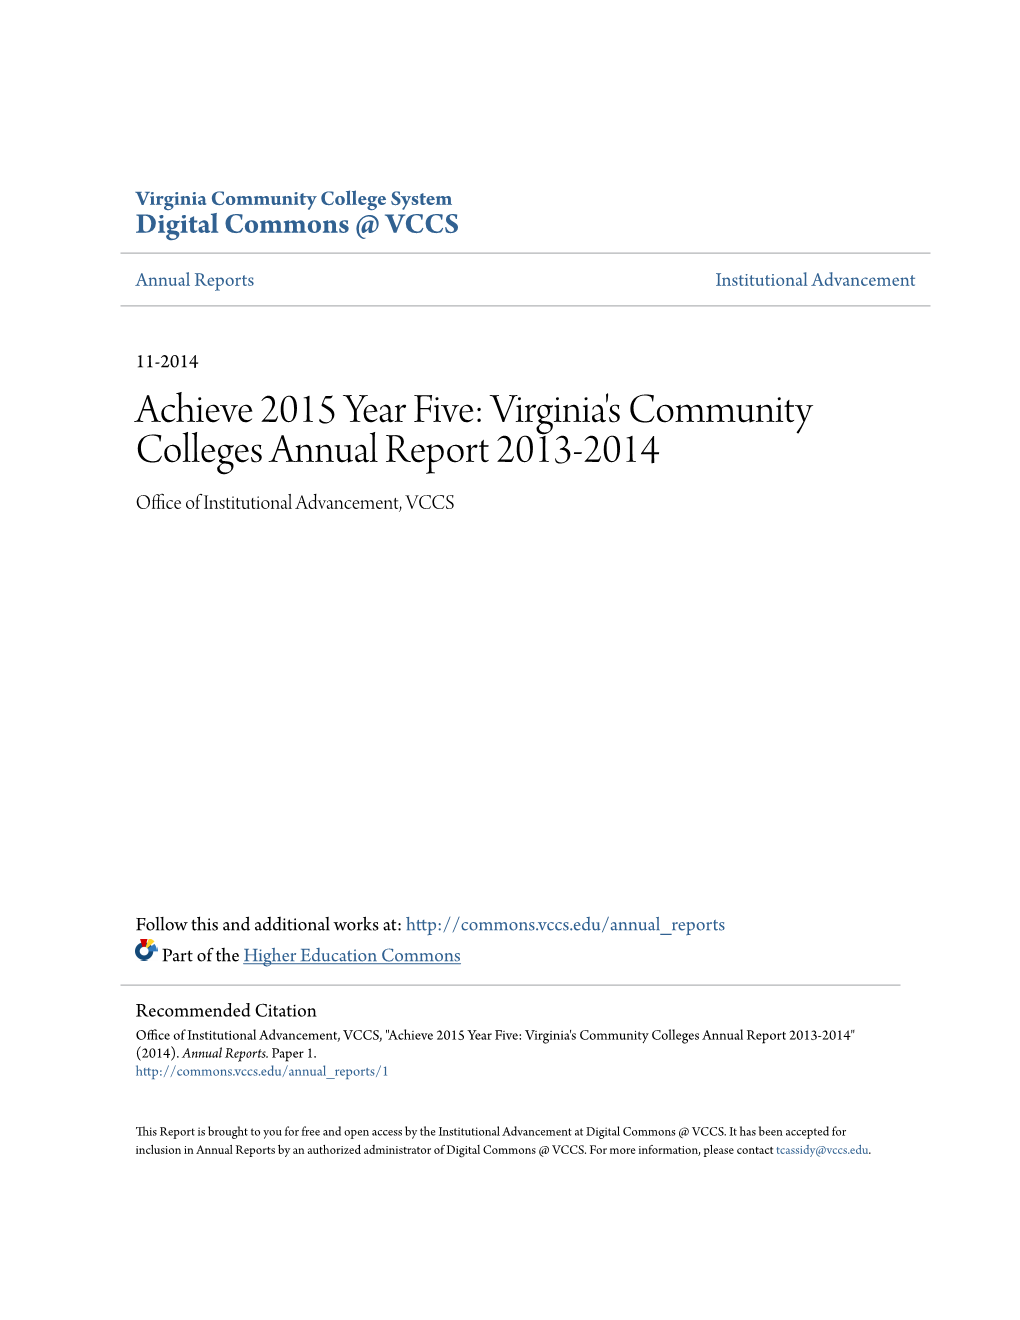 Virginia's Community Colleges Annual Report 2013-2014 Office Ofns I Titutional Advancement, VCCS